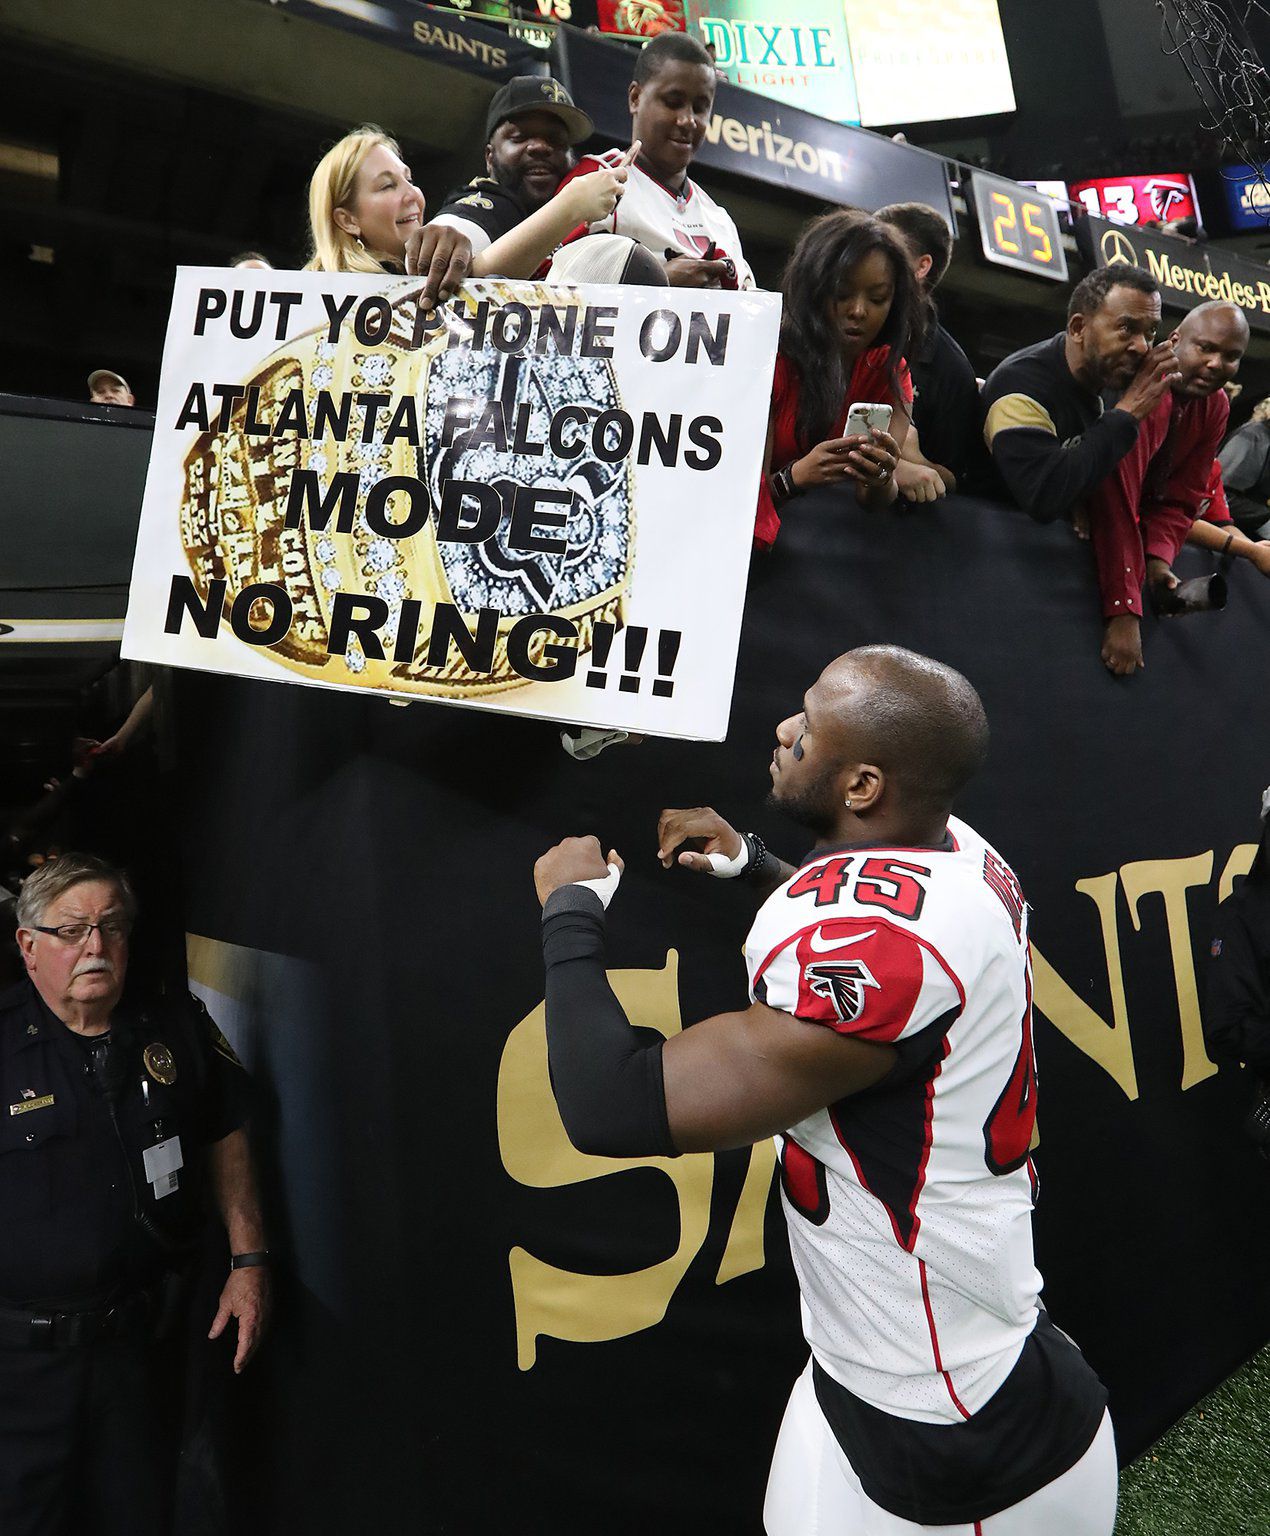 With Saints one win away from Atlanta, Falcons fans fret